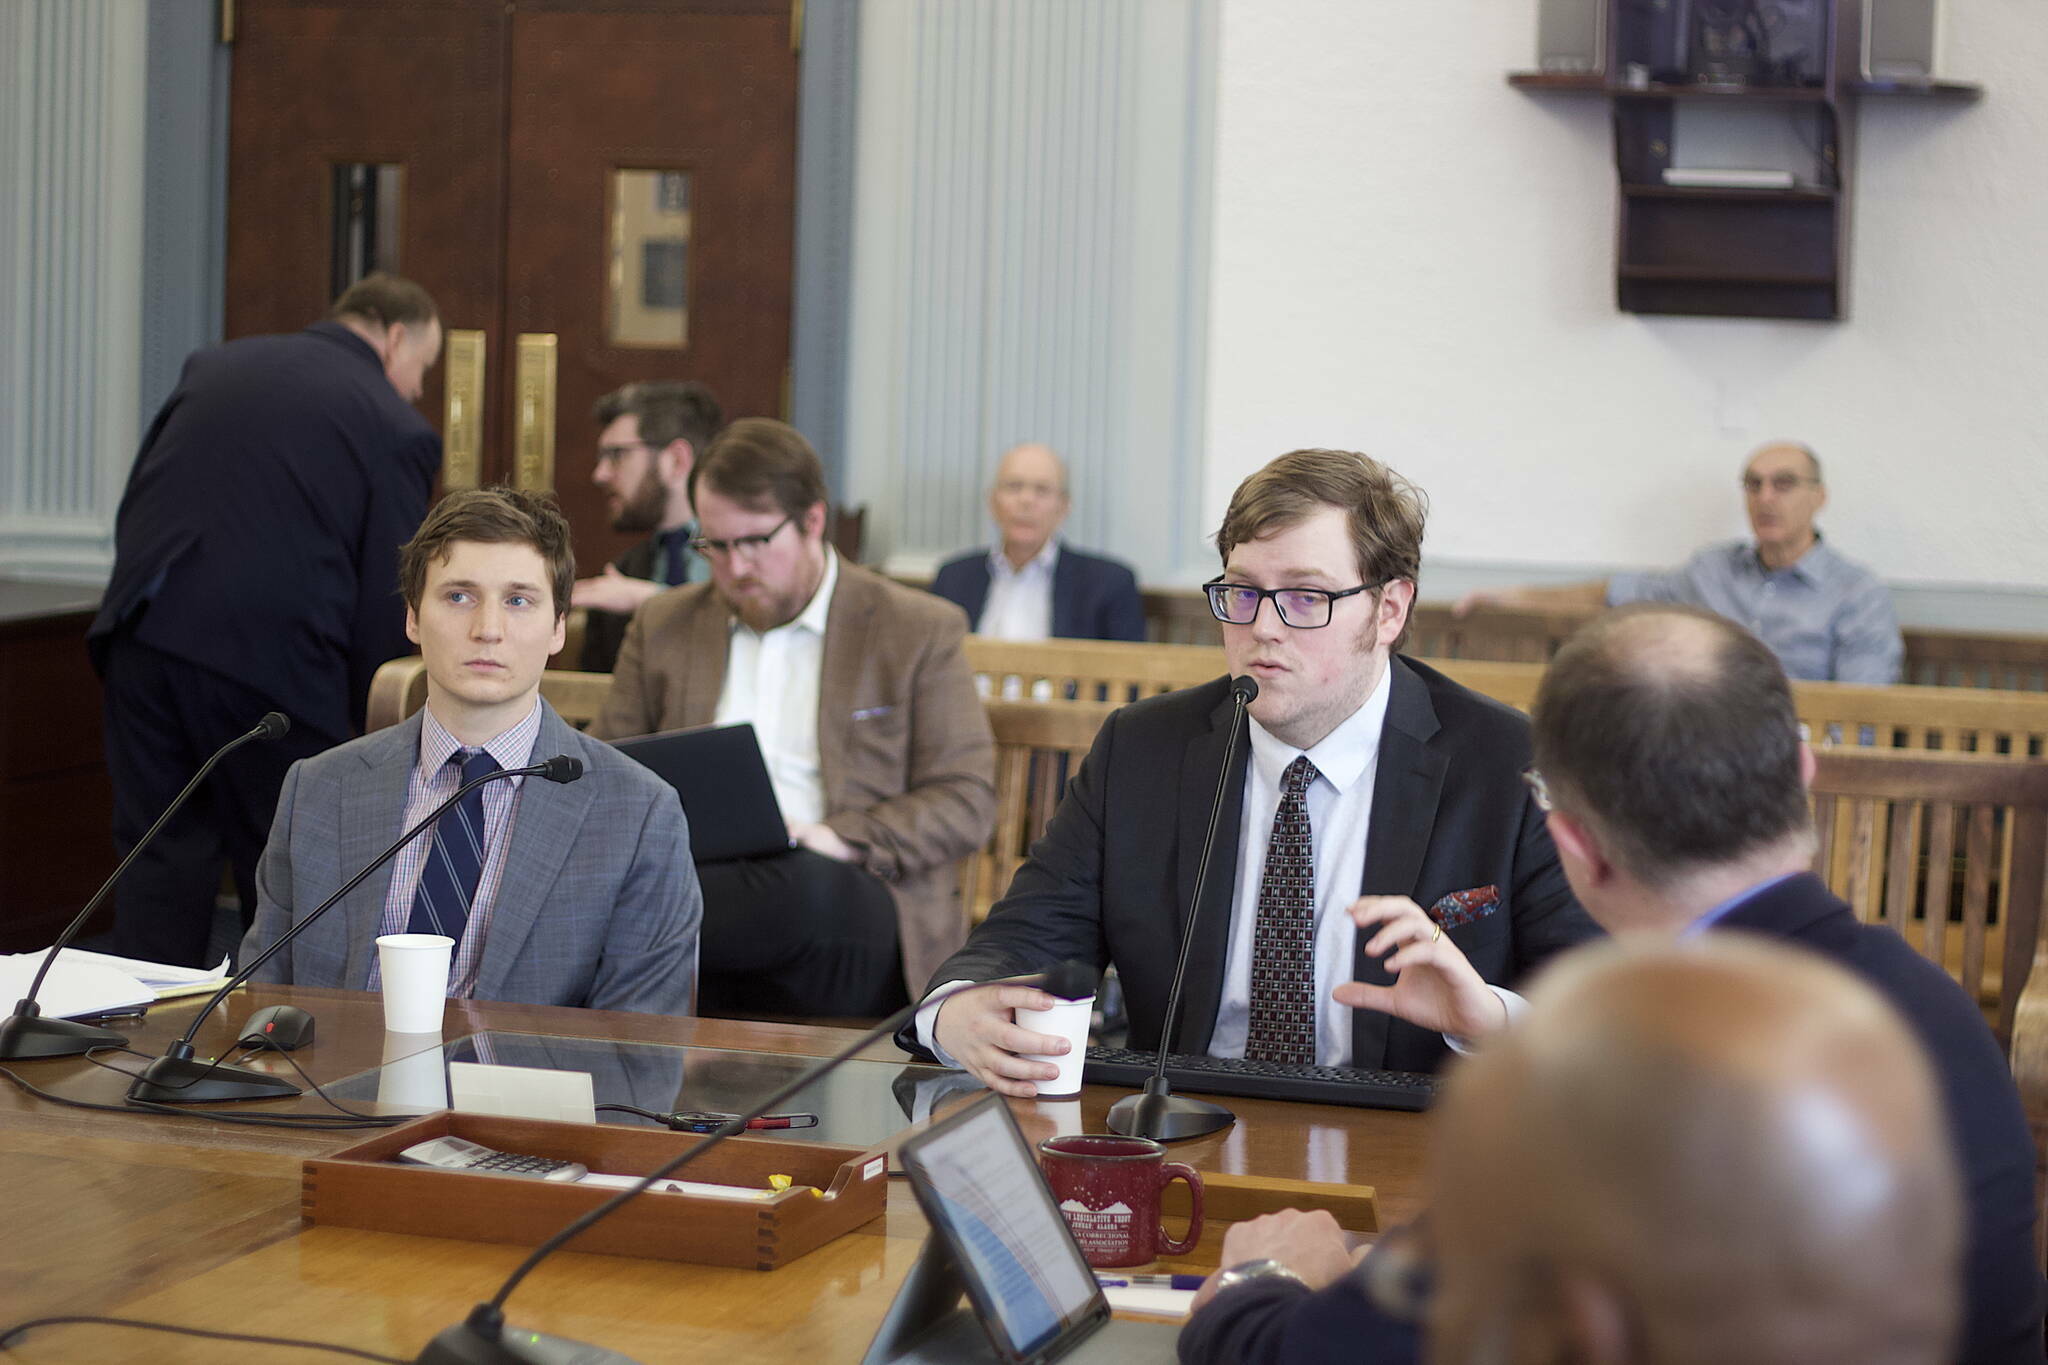 Legislative fiscal analysts Alexei Painter, right, and Conor Bell explain the state’s financial outlook during a presentation to the Senate Finance Committee on March 24, 2023. (Mark Sabbatini / Juneau Empire)